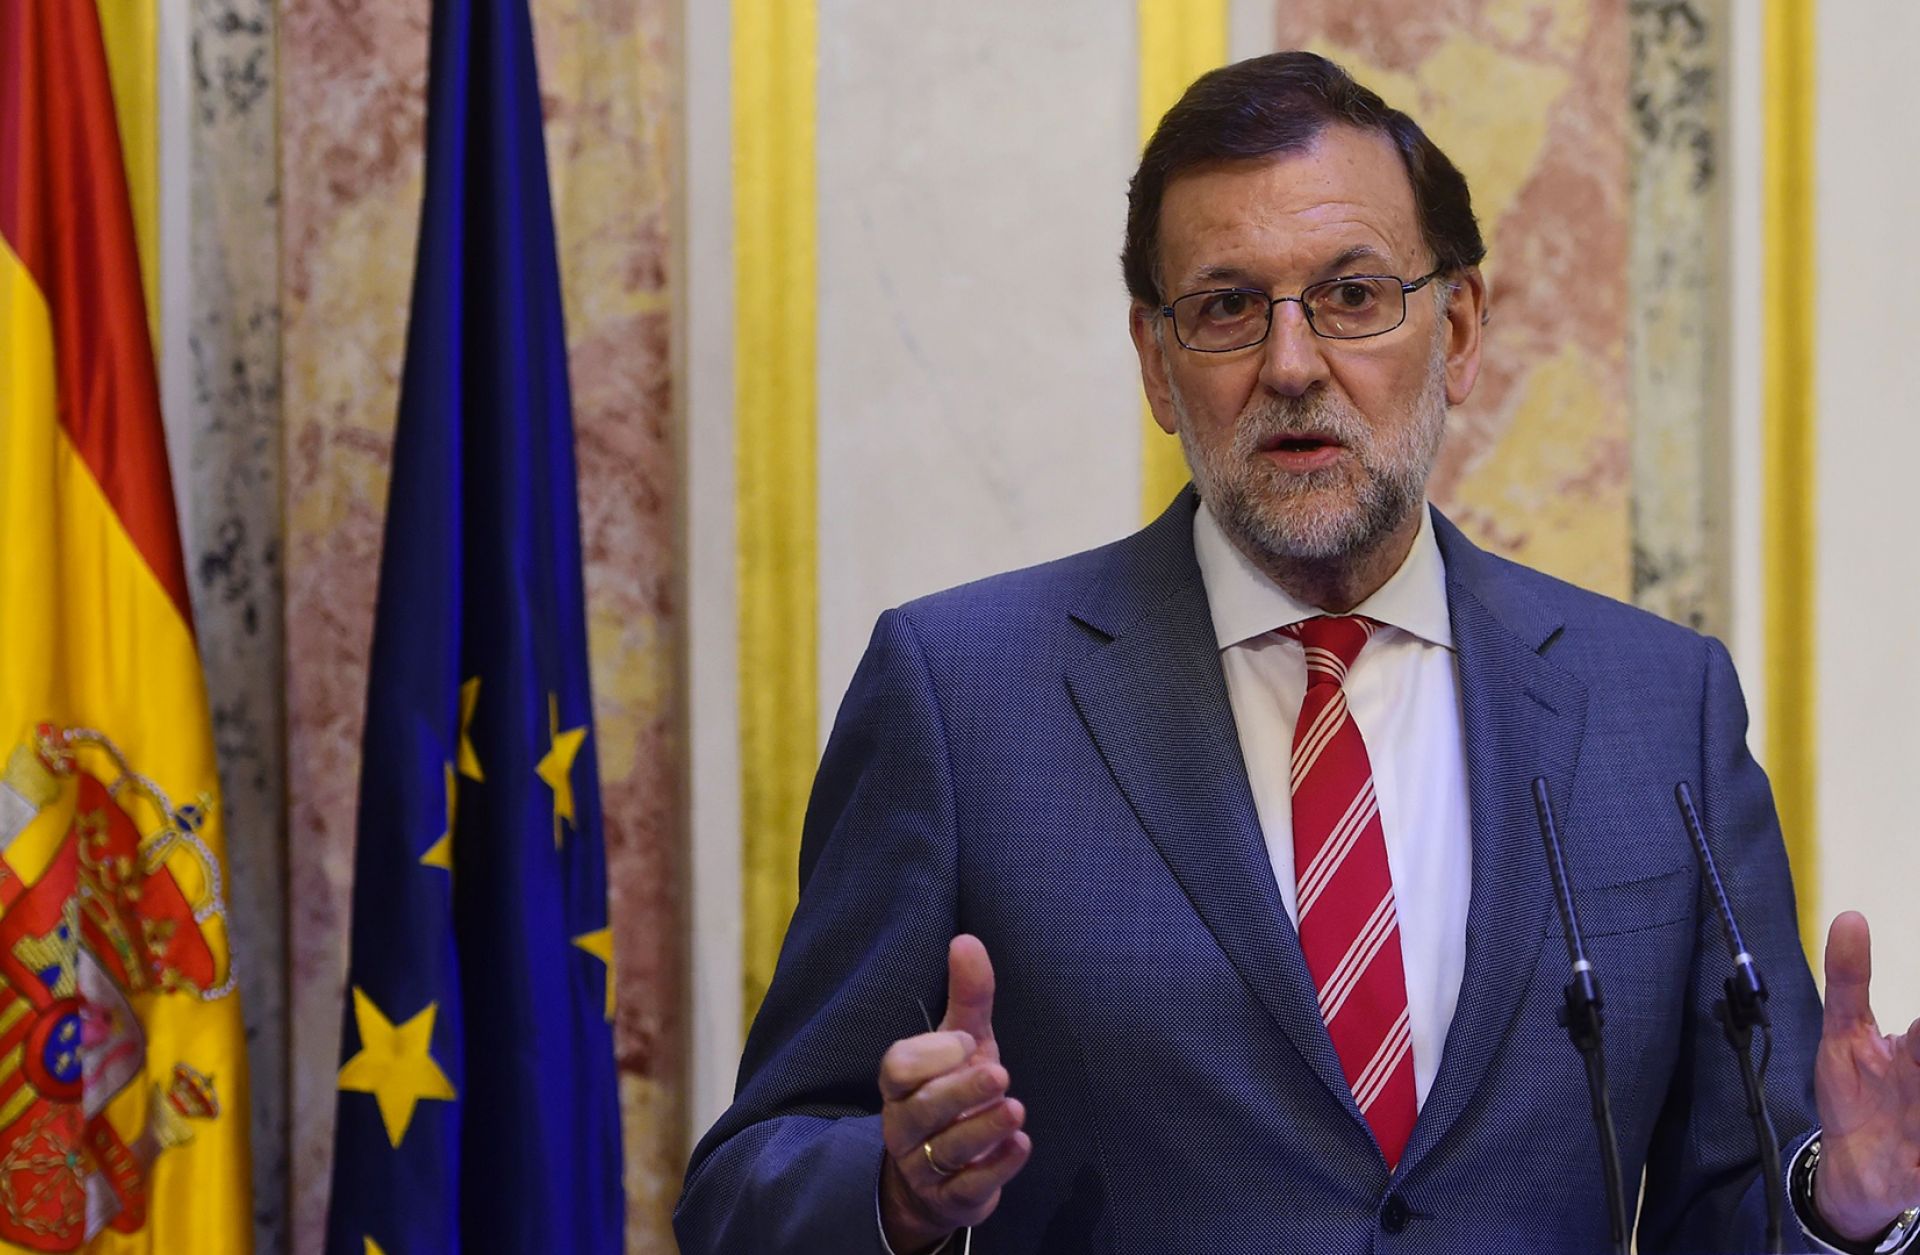 In Spain, Little Progress in Forming a Government